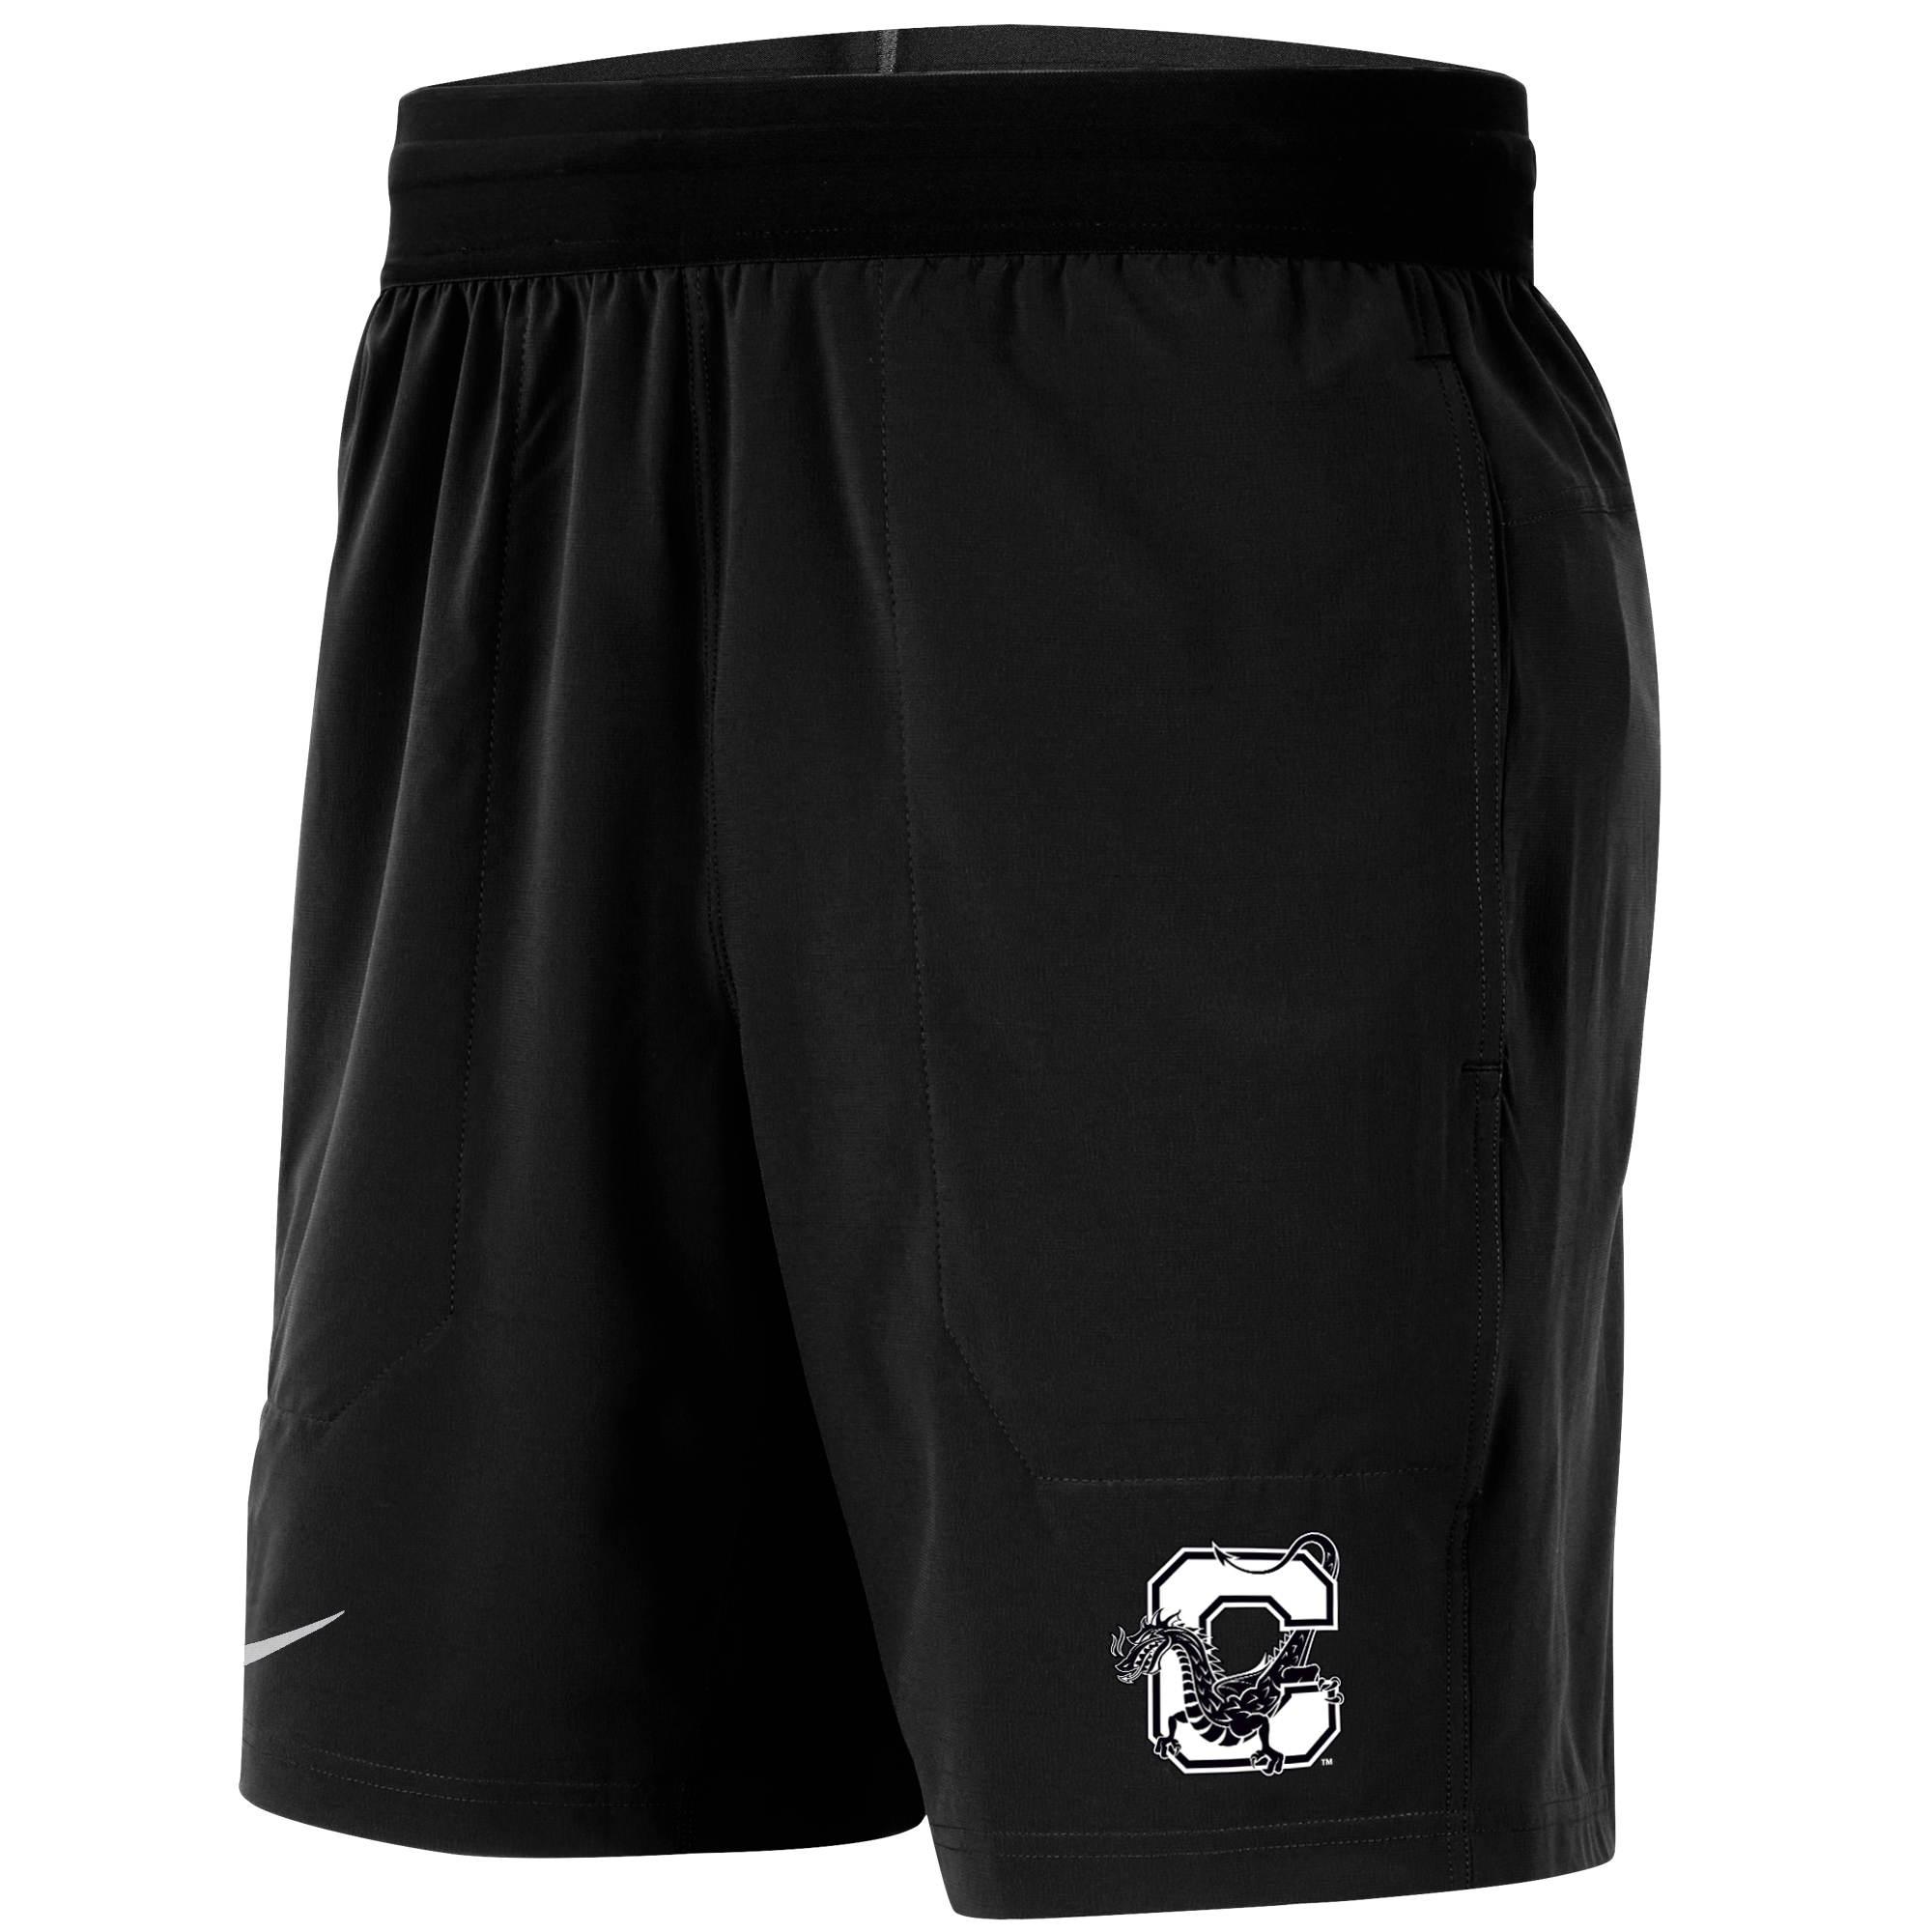 Shorts | The Campus Store